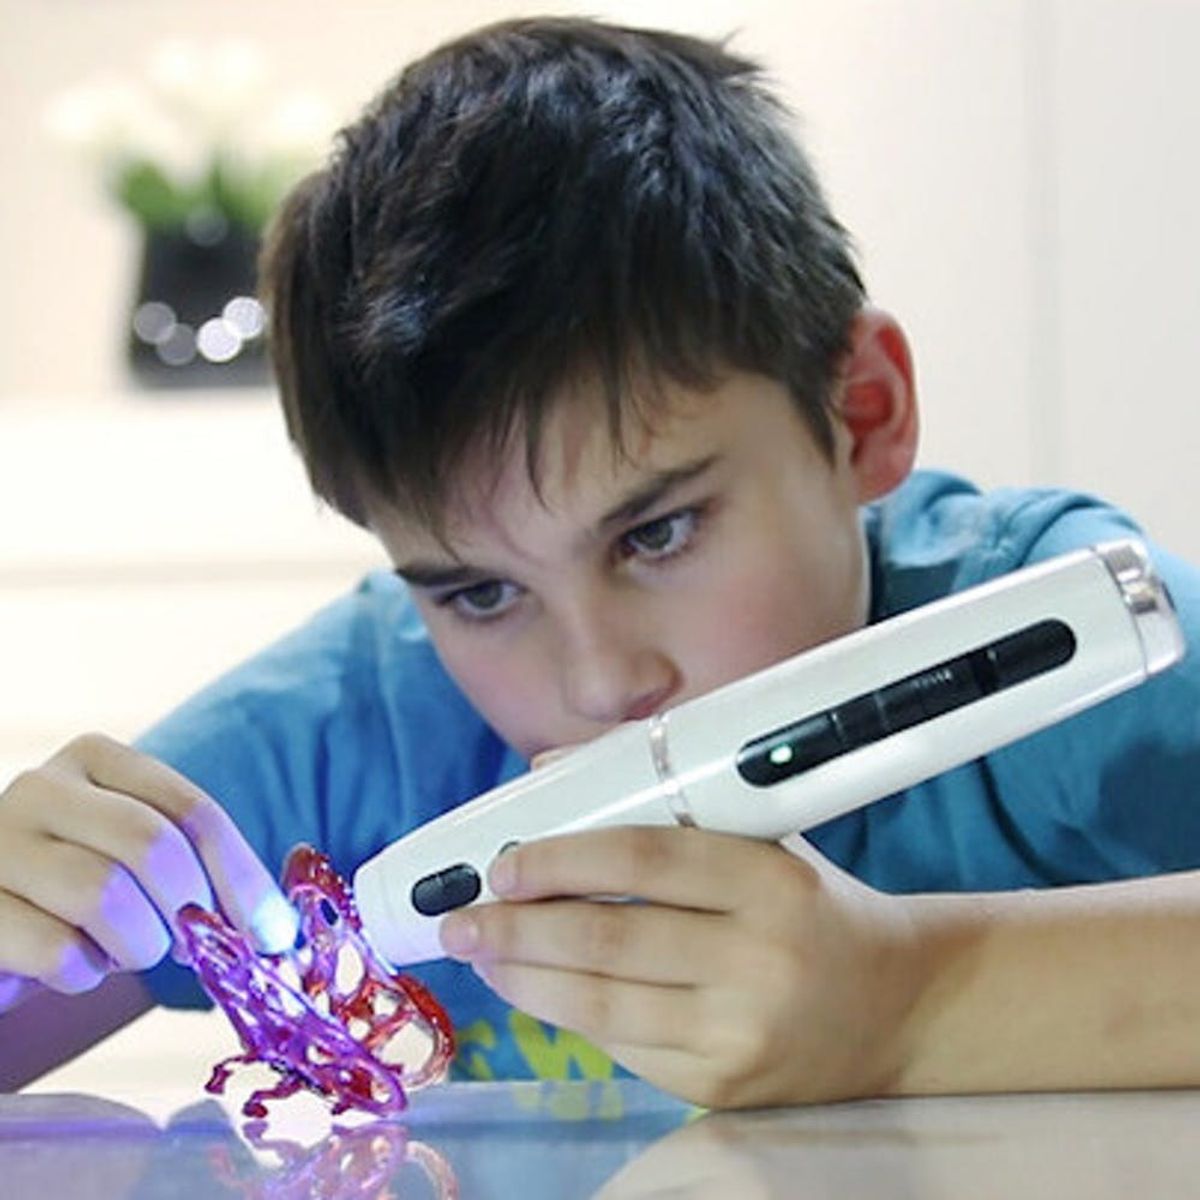 There’s Now a 3D Pen for Your Kids?!